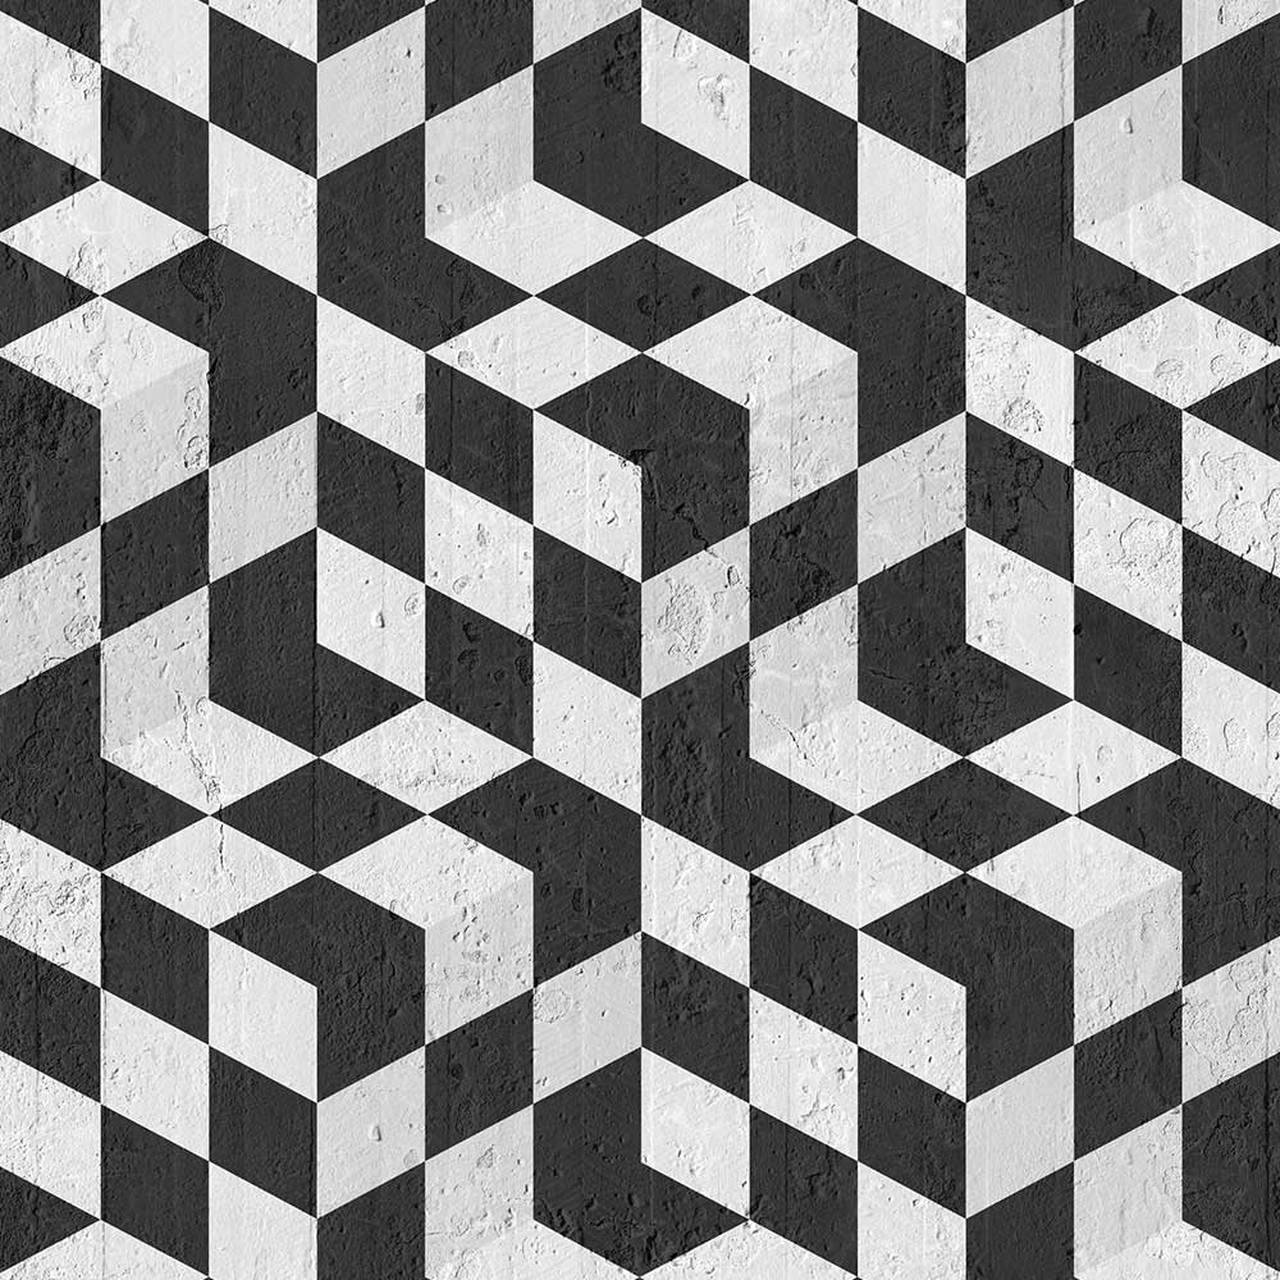 Captivating Pattern of 3D Black and White Squares Wallpaper